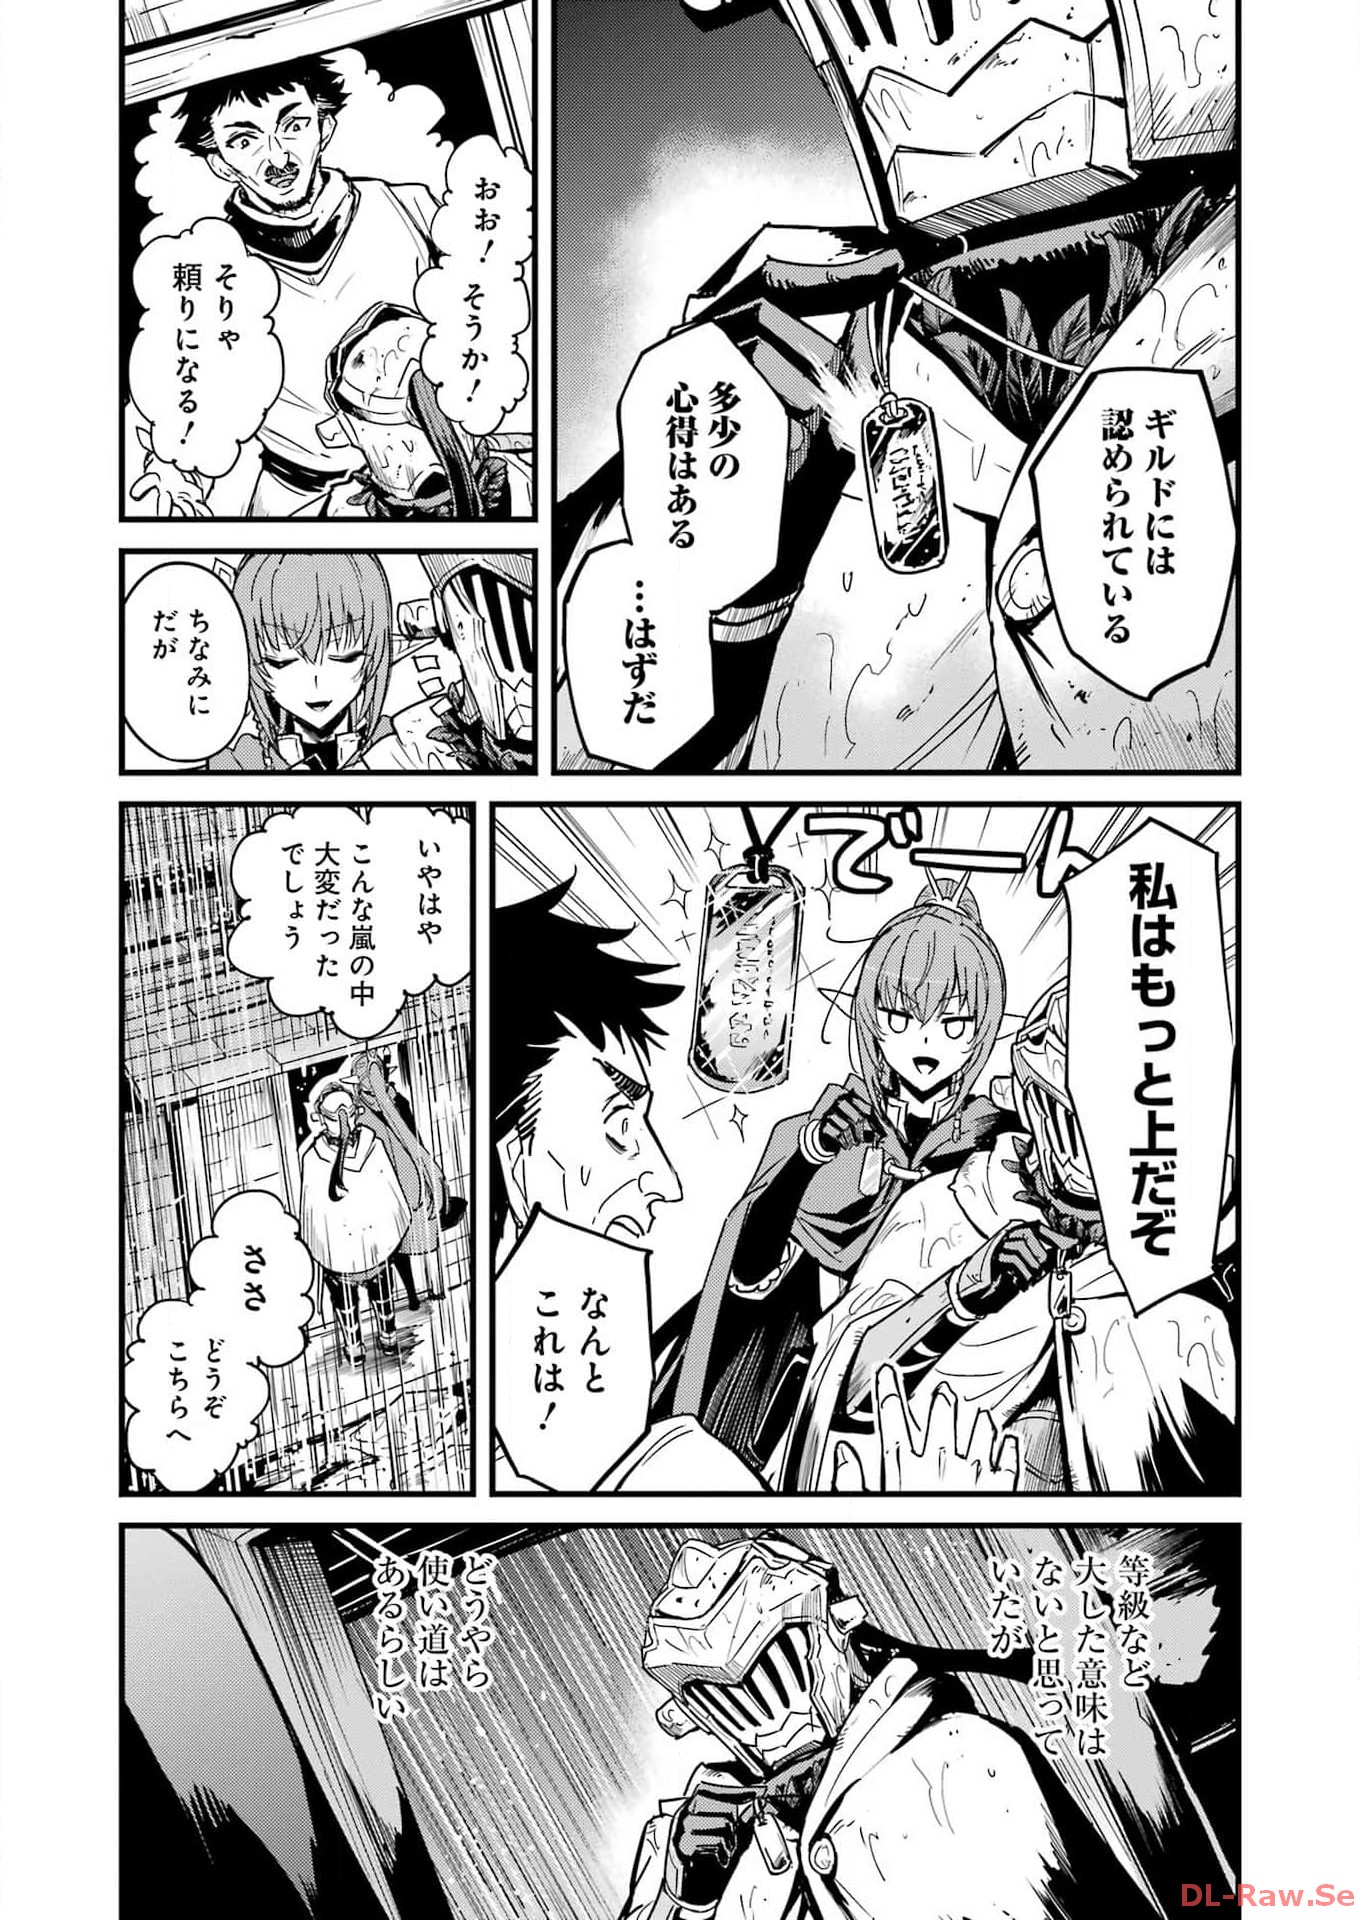 Goblin Slayer: Side Story Year One - Chapter 97 - Page 3